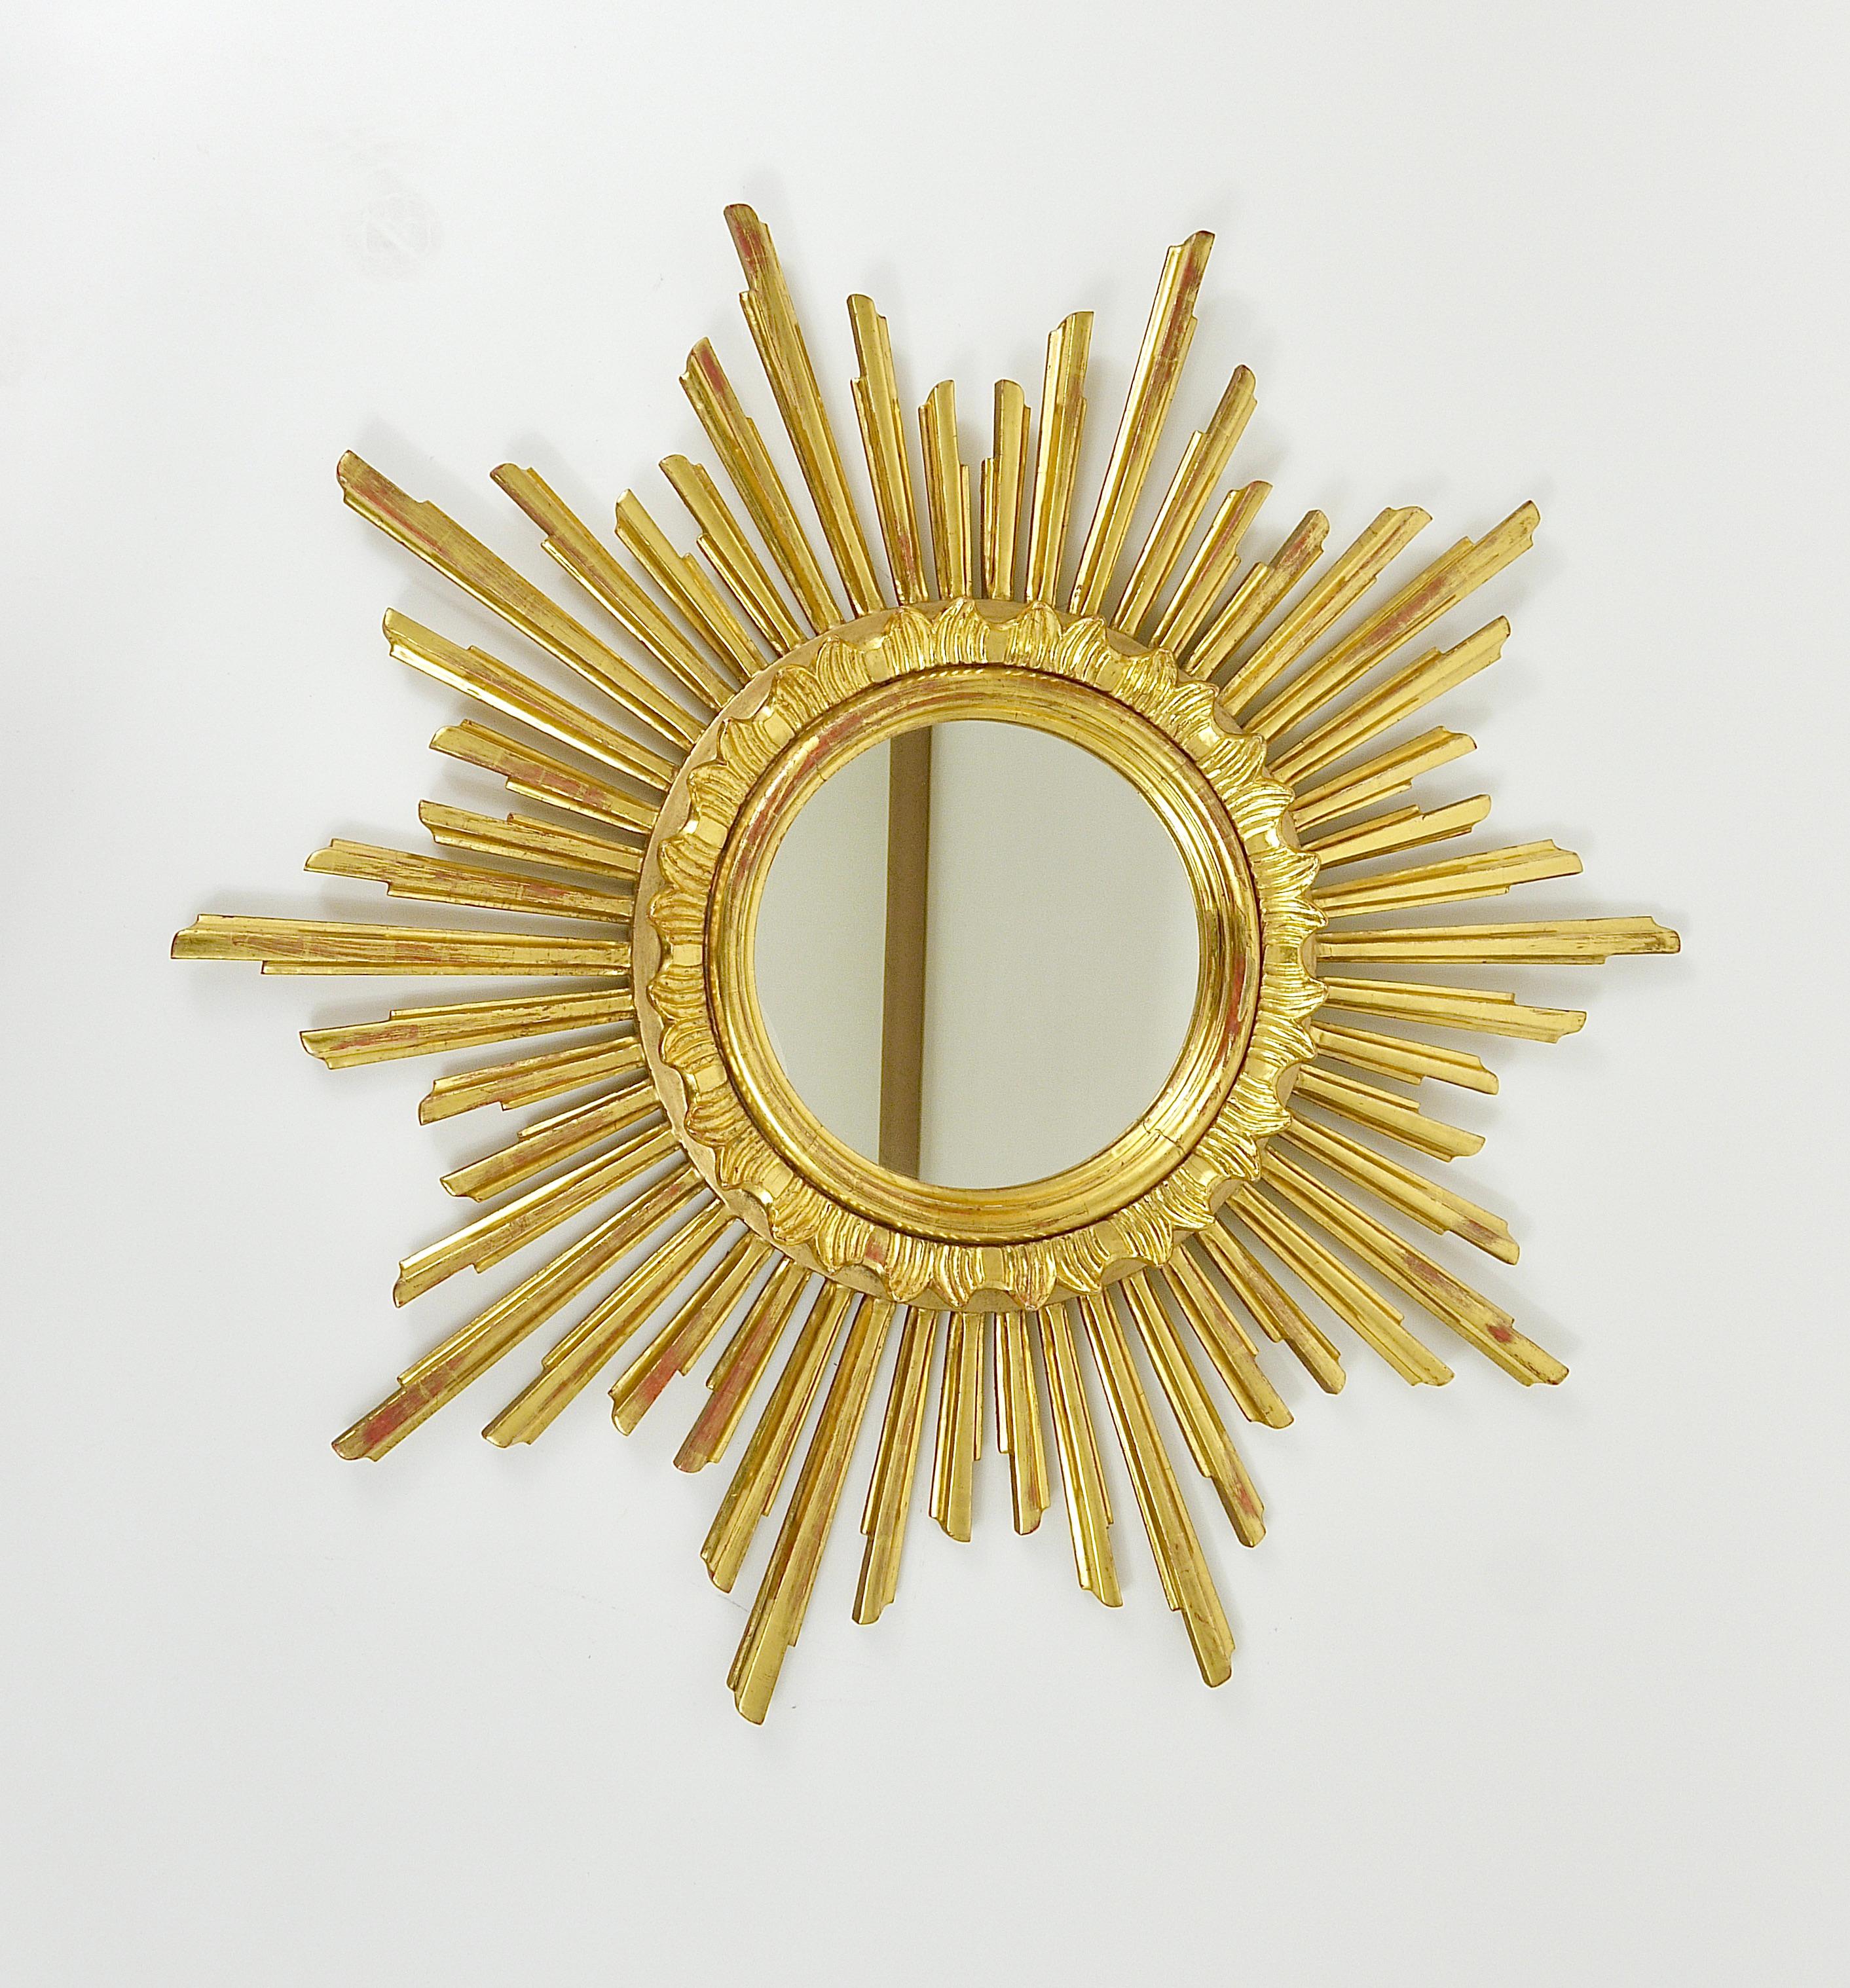 A beautiful, large golden mid-century soleil sunburst starburst gilt wood mirror. Made in France, dated around the 1960s. Handmade of carved gold-plated wood, in good condition. Total diameter 27“, the diameter of the mirror itself is 8“.